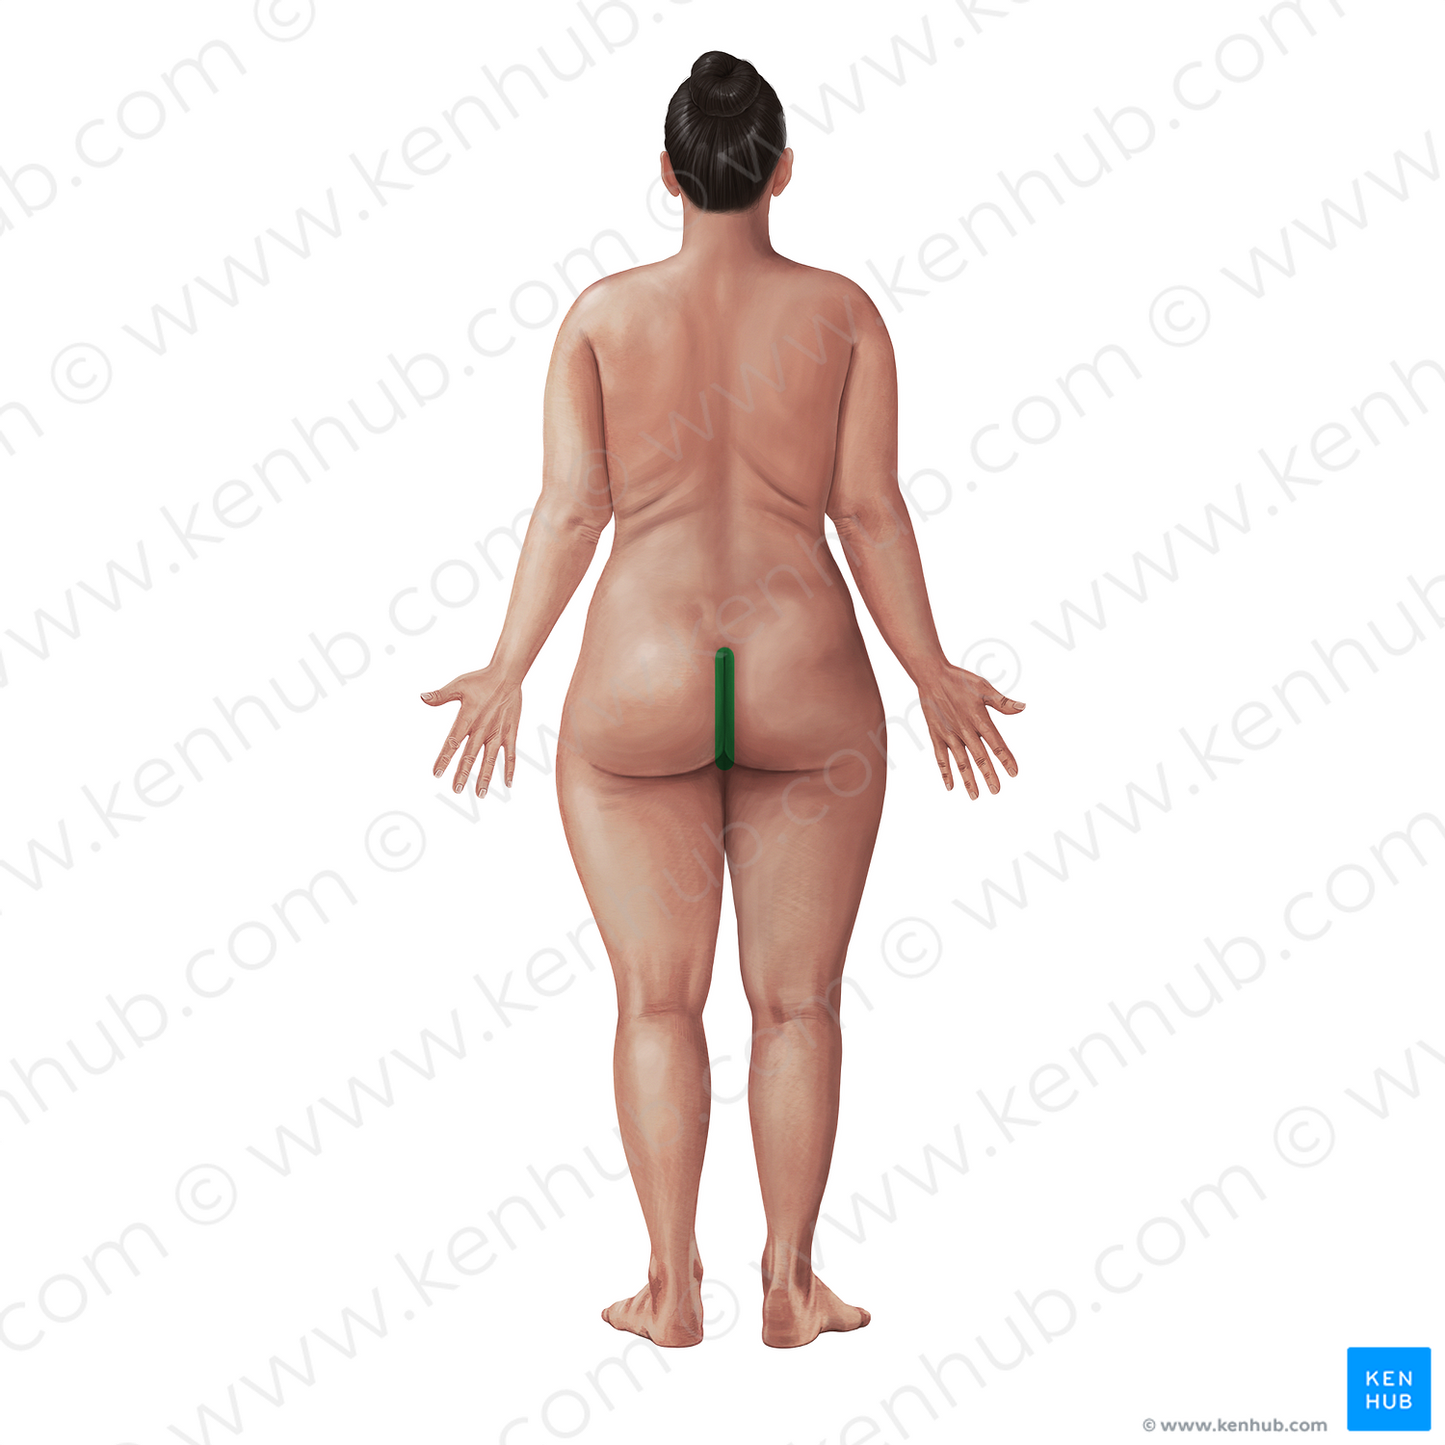 Intergluteal cleft (#21071)